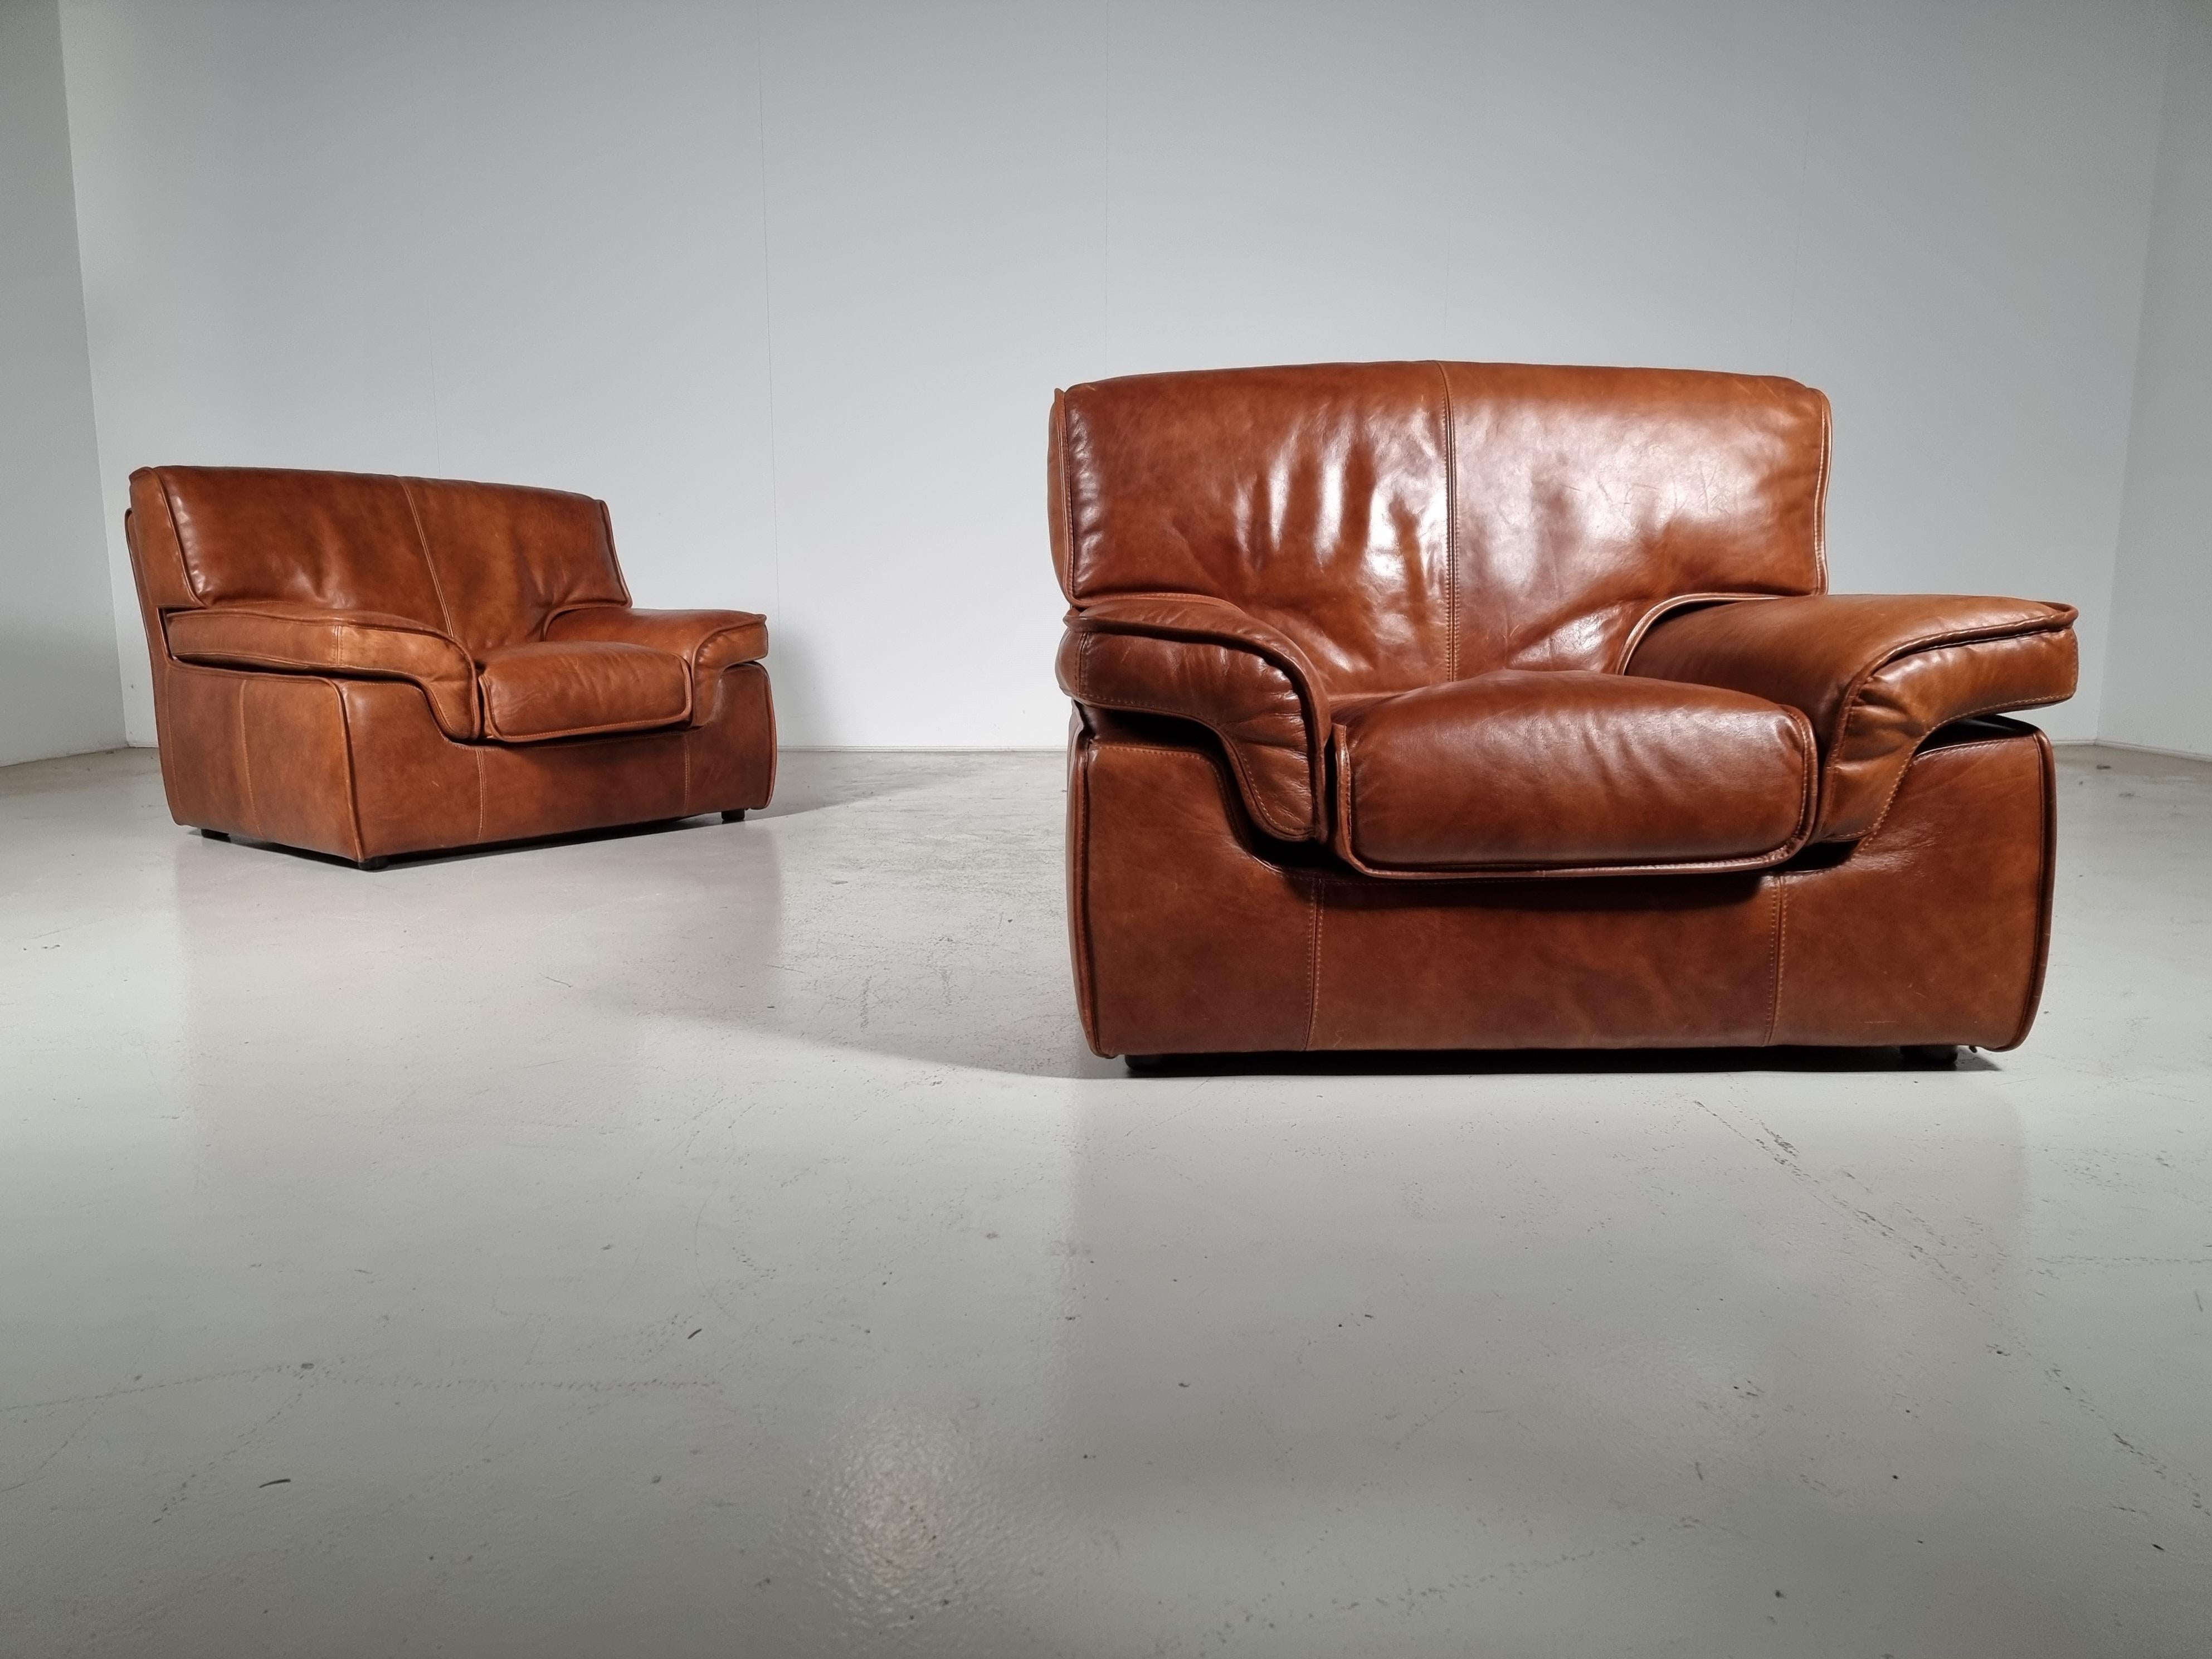 European Pair of Huge Italian Lounge Chairs in Cognac Buffalo Leather, 1970s For Sale